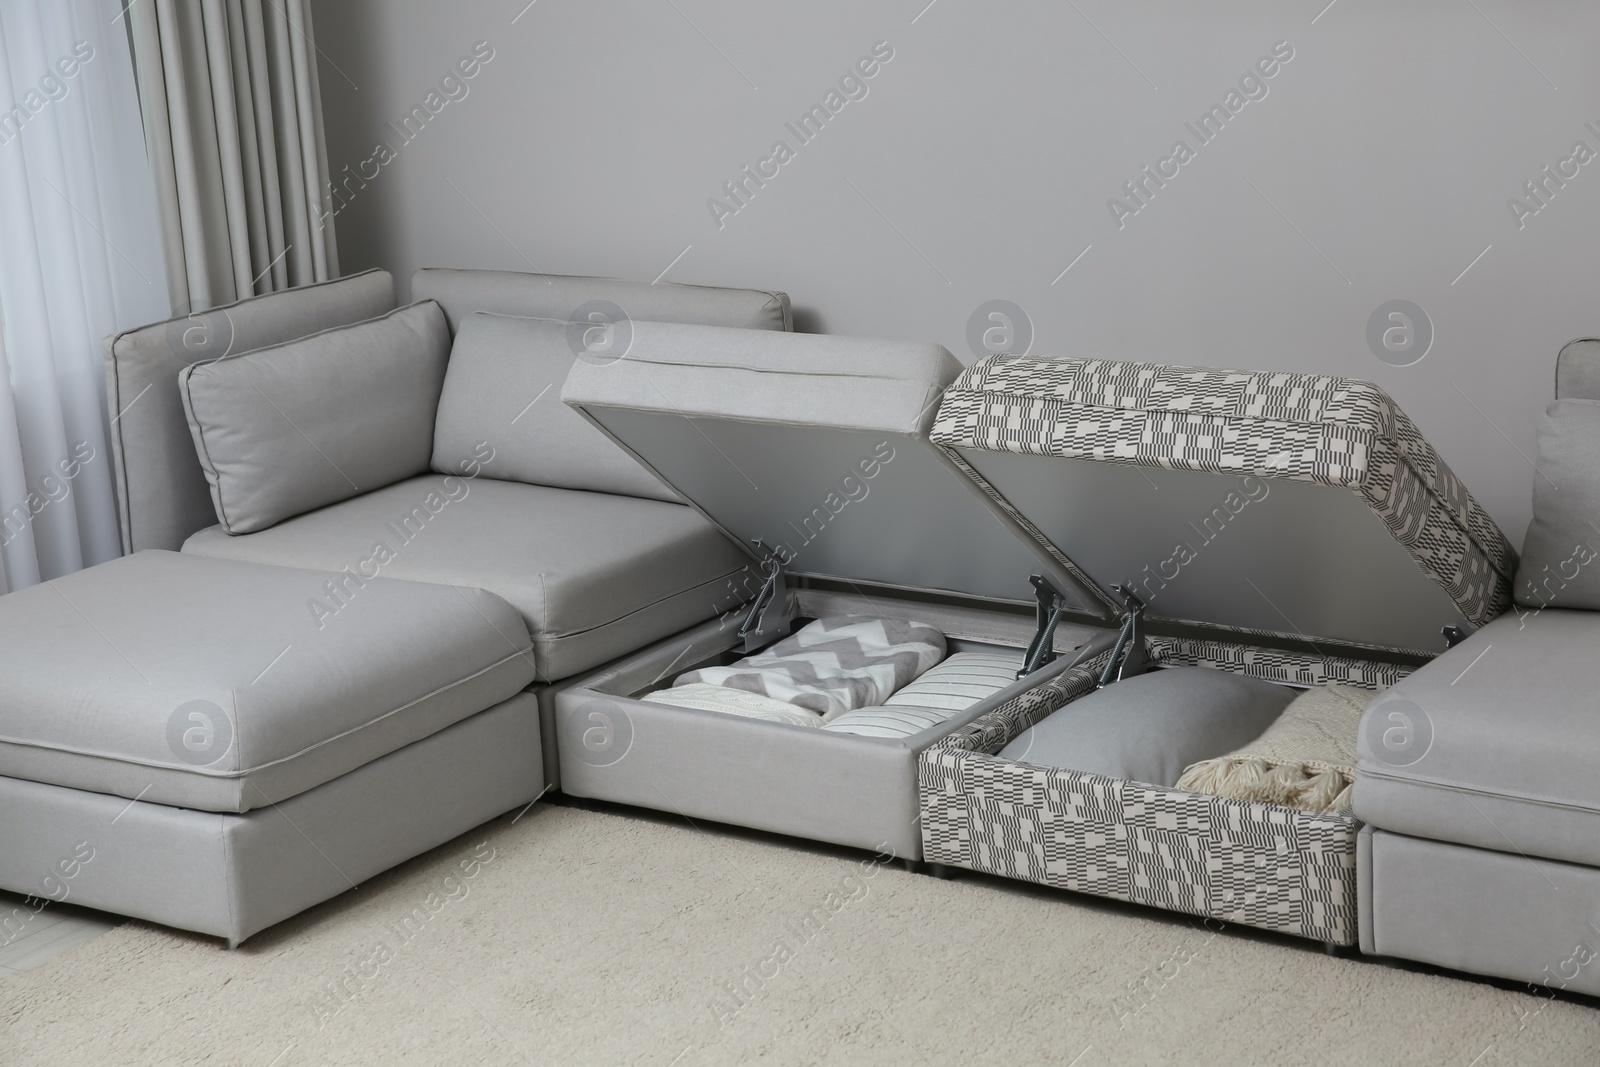 Photo of Modular sofa with storage near wall in living room. Interior design